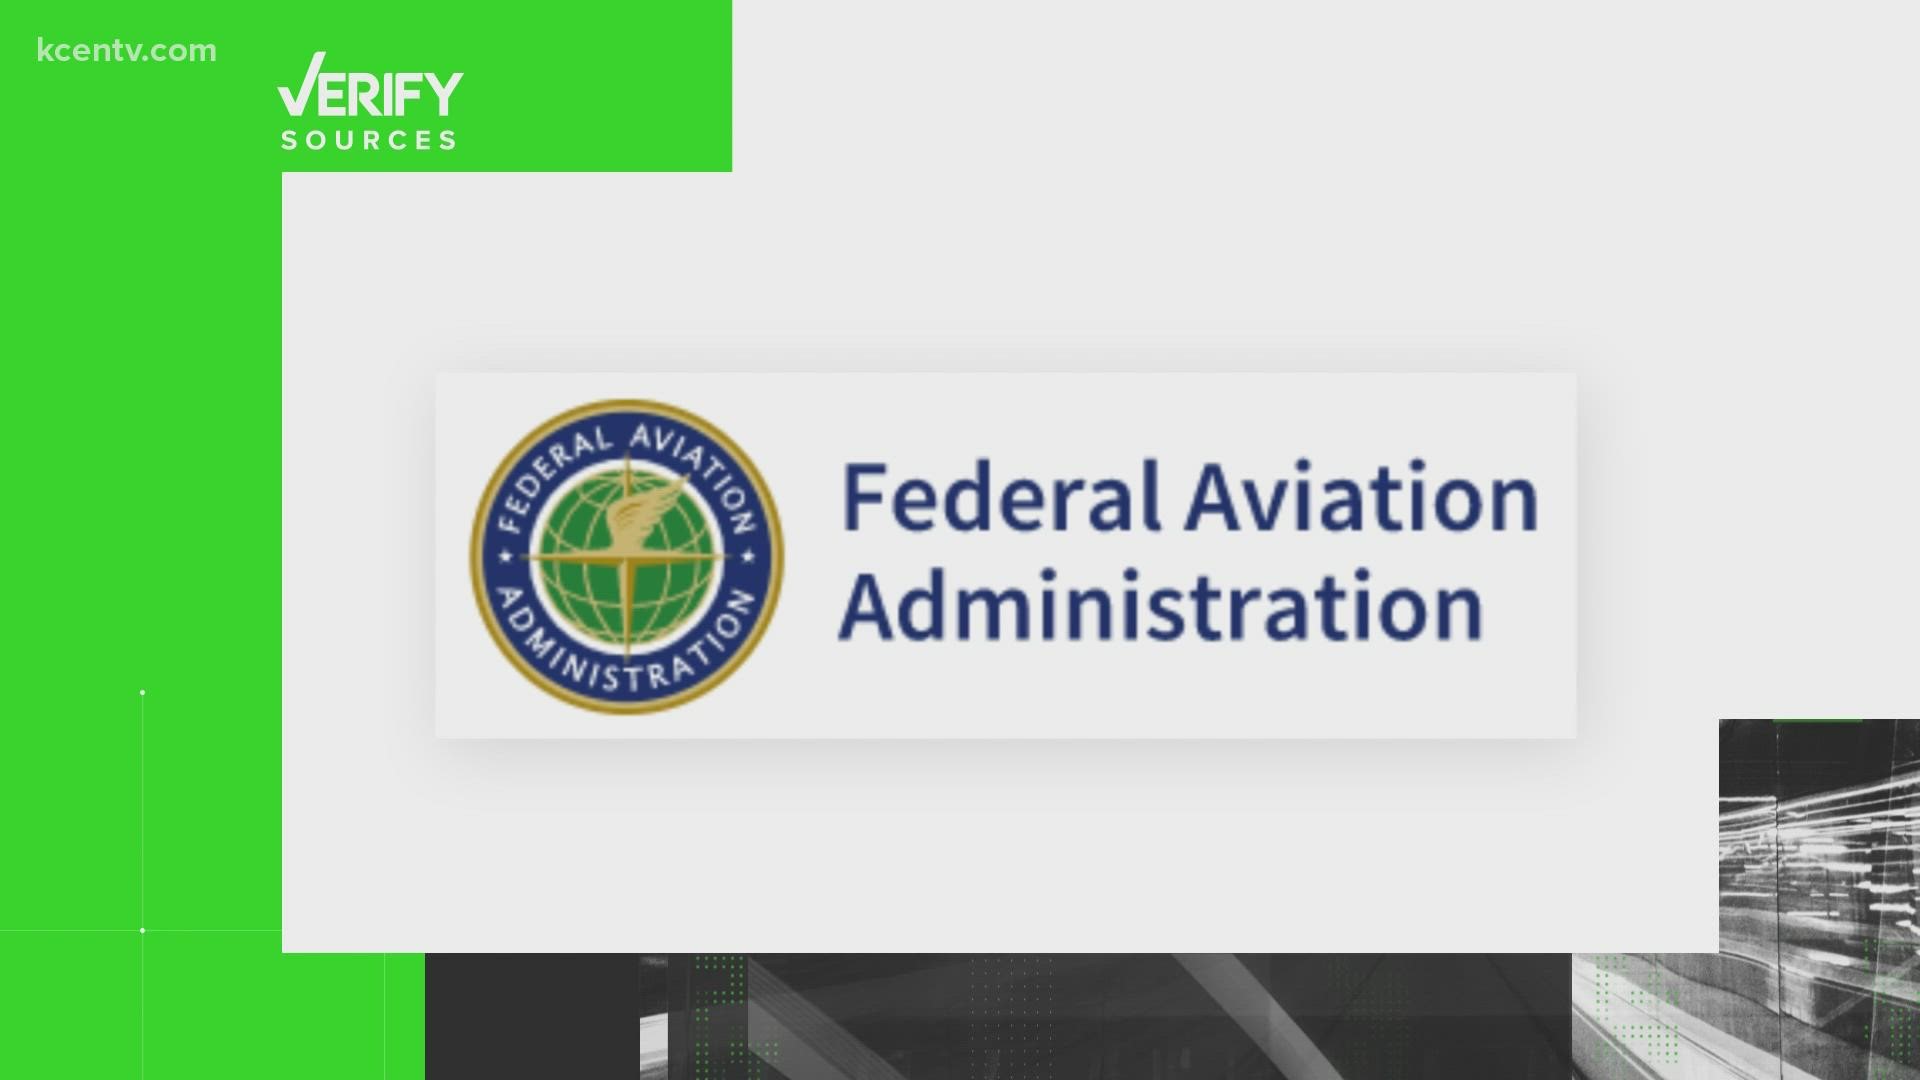 Verify's Brandon Lewis looked into whether there's a national no-fly list unruly passengers could end up on.